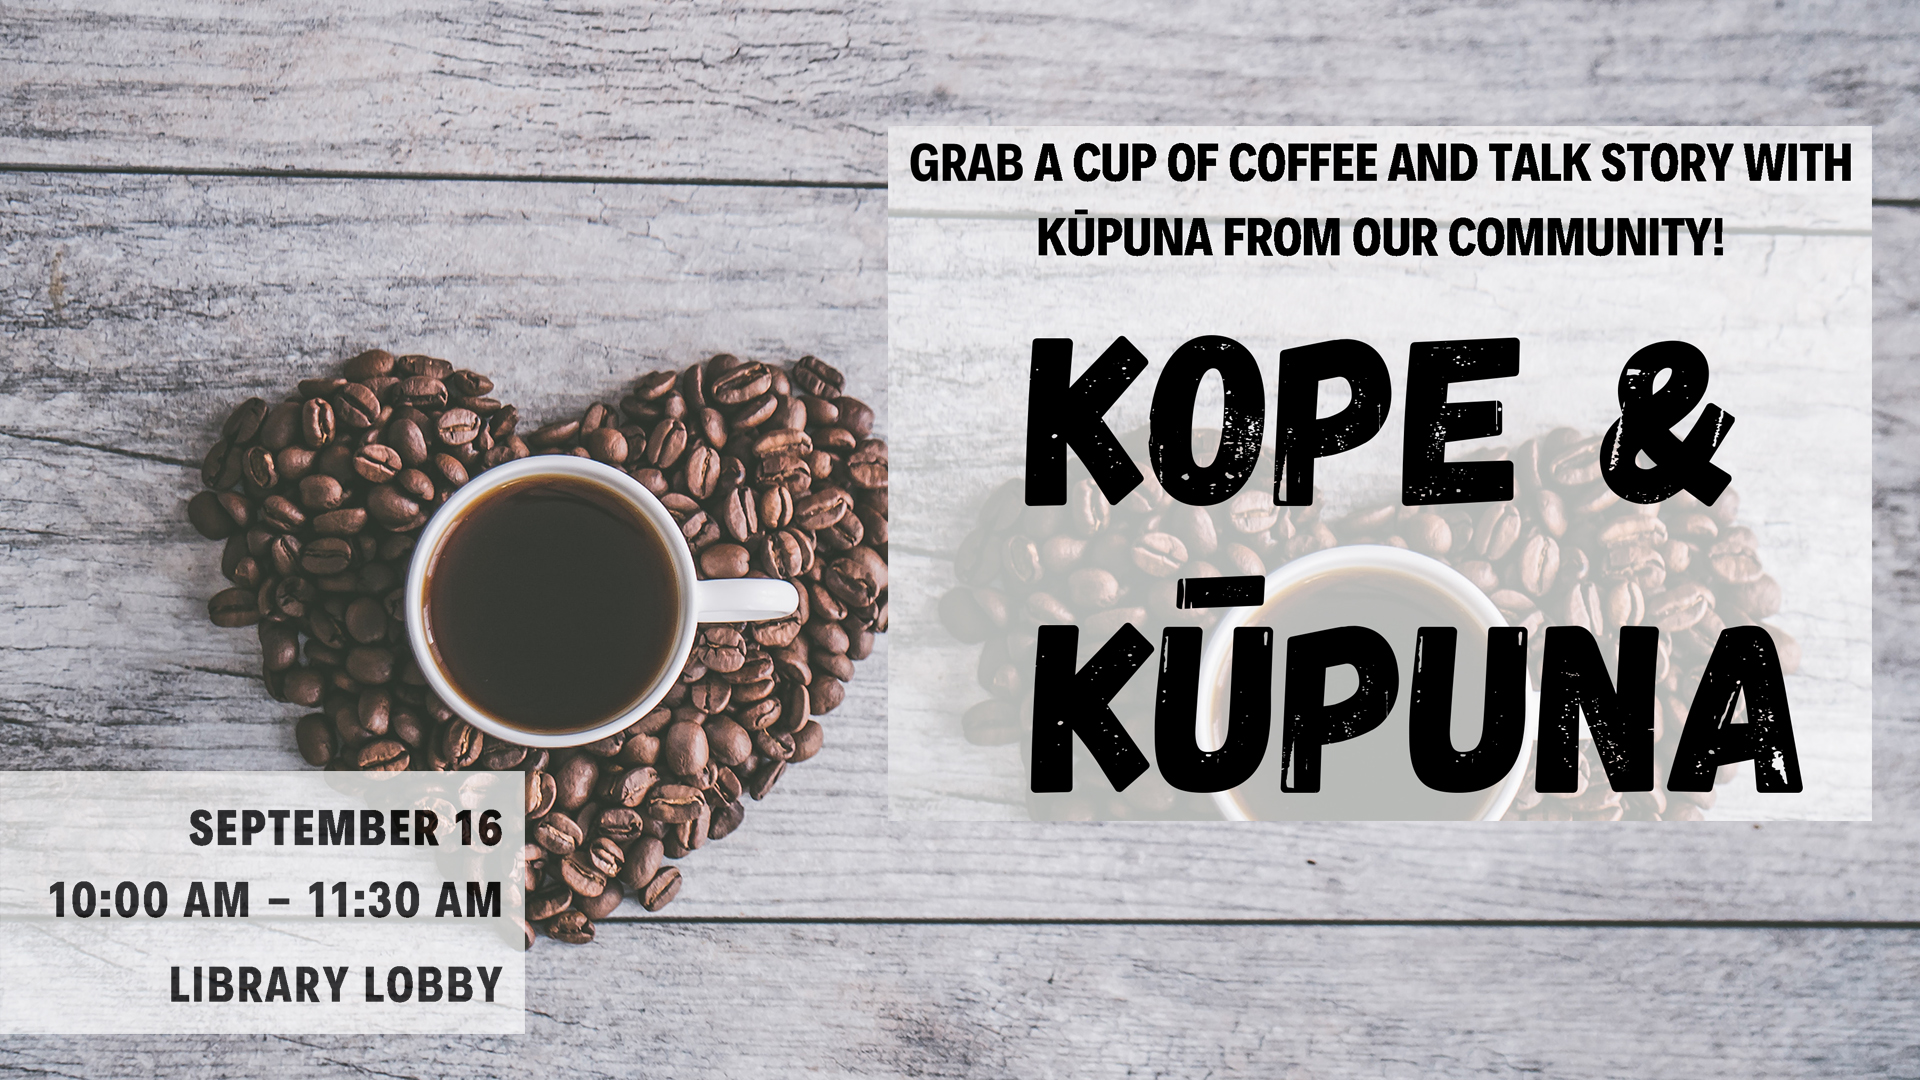 Kope + Kupuna invites the community to grab a cup of cofee and talk story with kupuna from the community on Sept. 16, 10 to 11:30 a.m. in the Library.